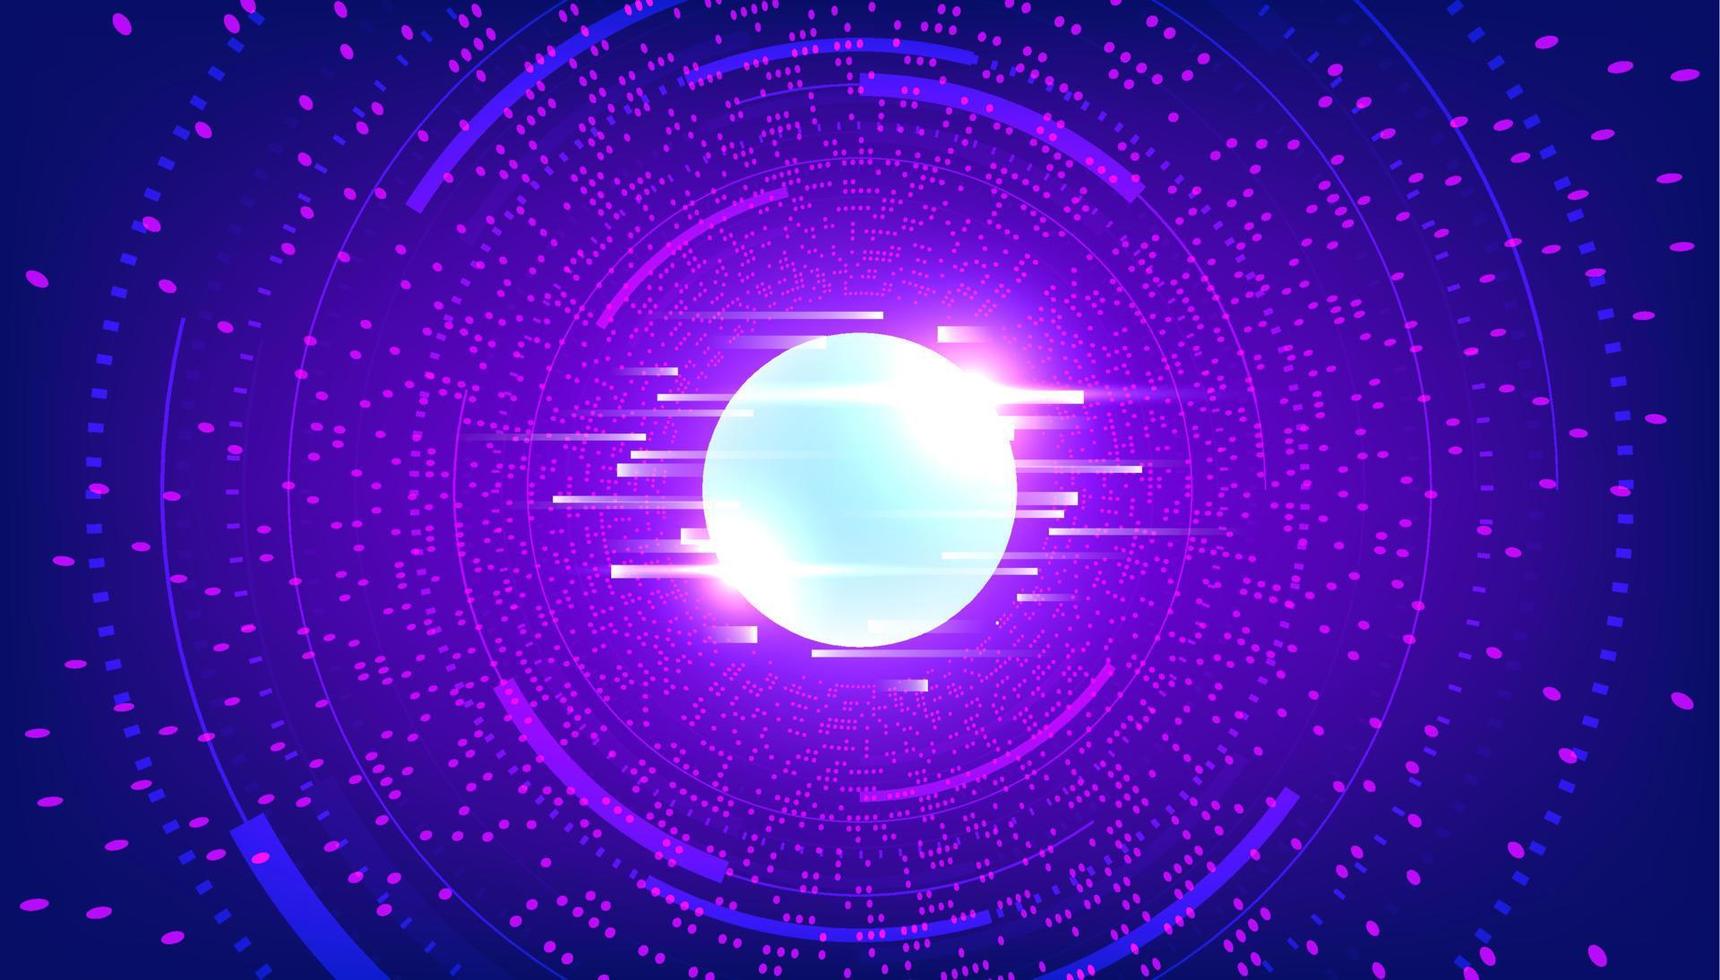 Metaverse abstract background with glowing glitch circle in the center, perspective tunnel, virtual cyber space. Vector